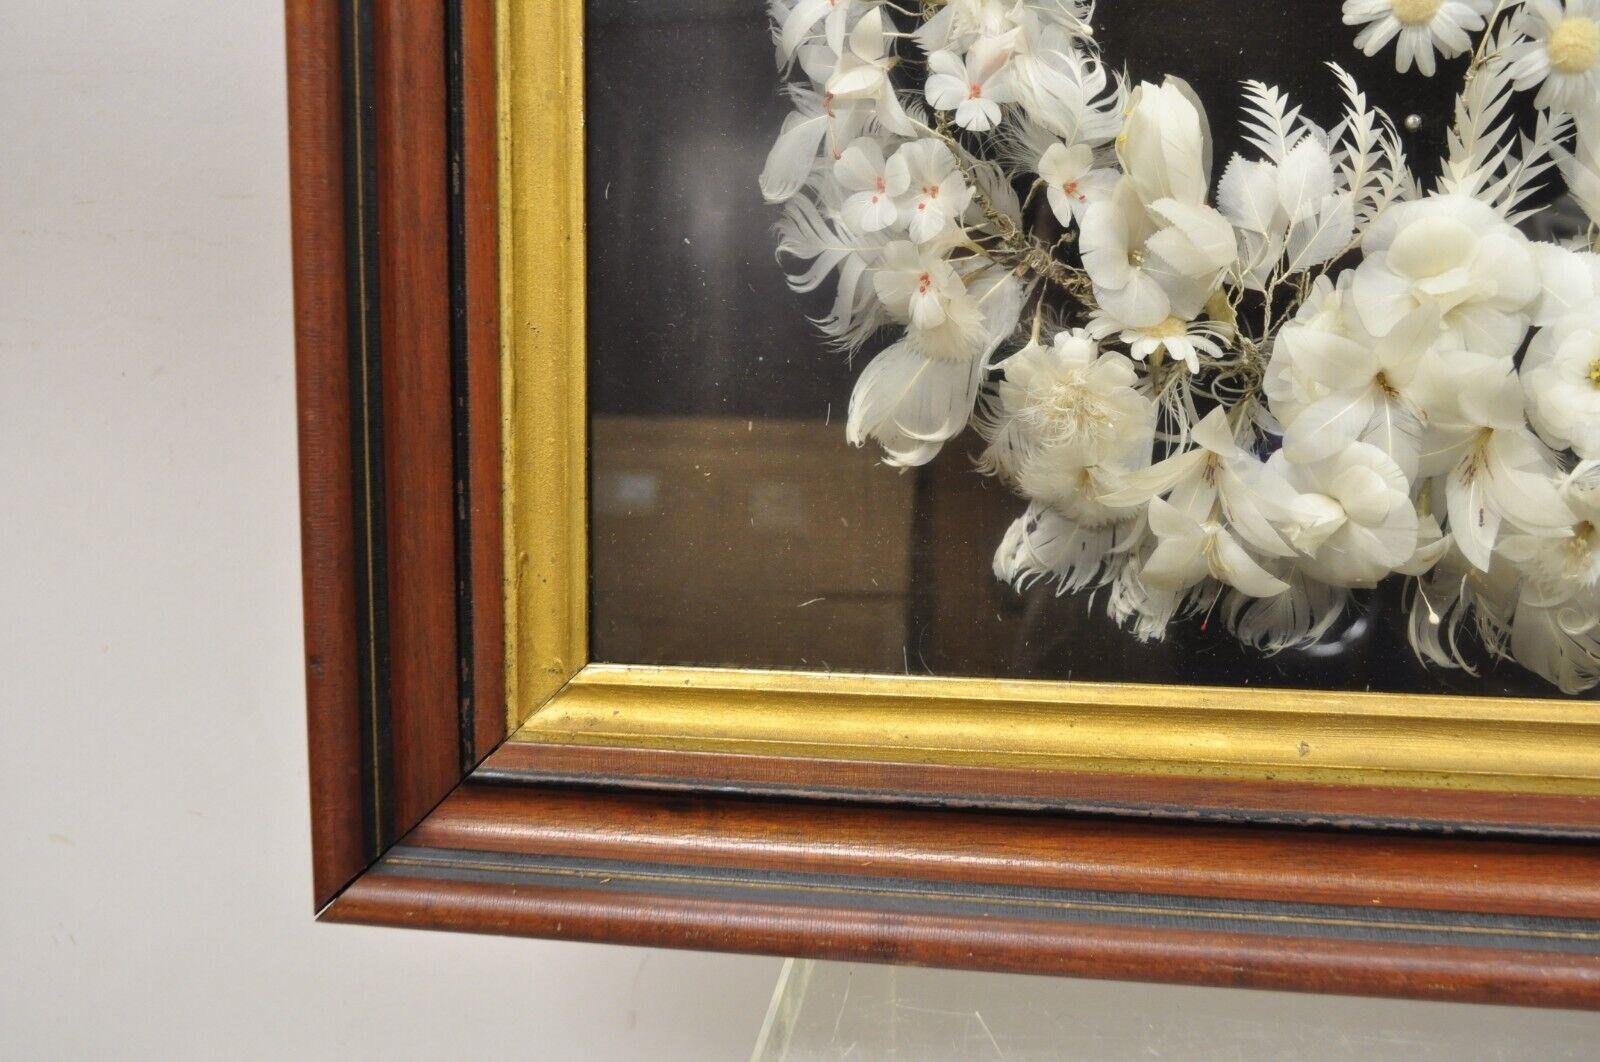 Antique Victorian White Feather Flower Mourning Wreath Mahogany Shadow Box Frame For Sale 3